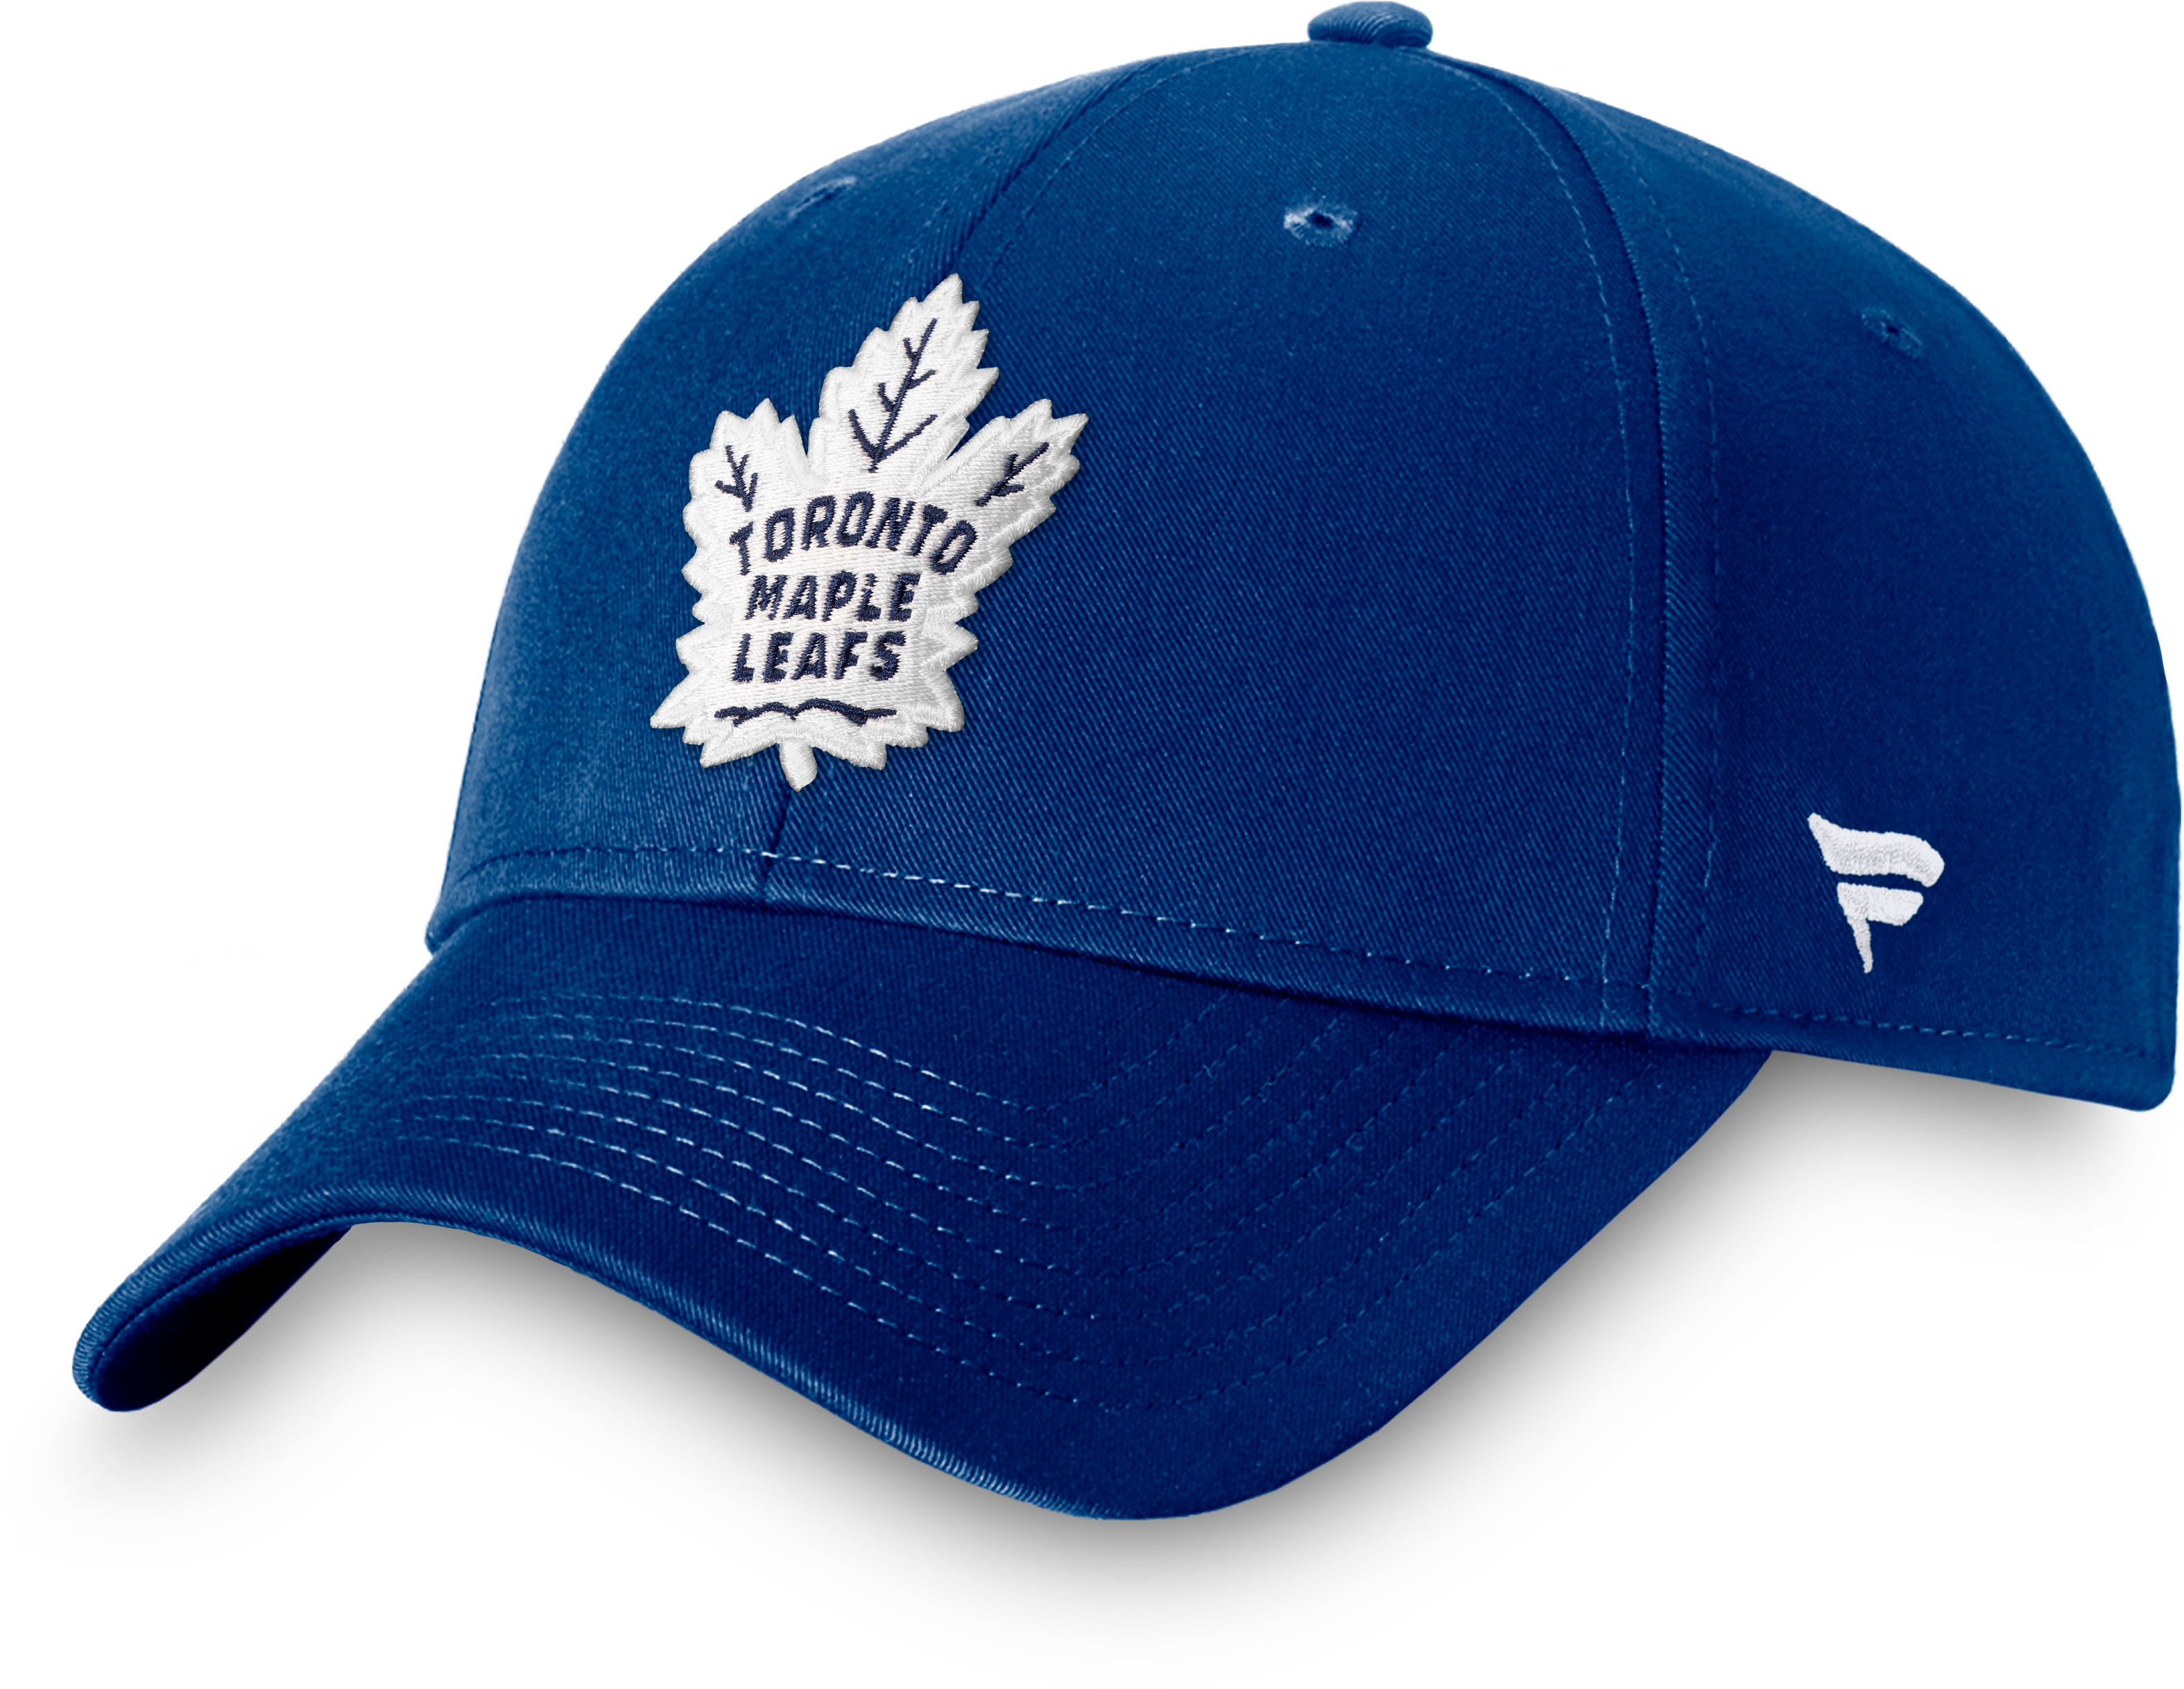 Maple Leafs Alpha Structured Adjustable Hat